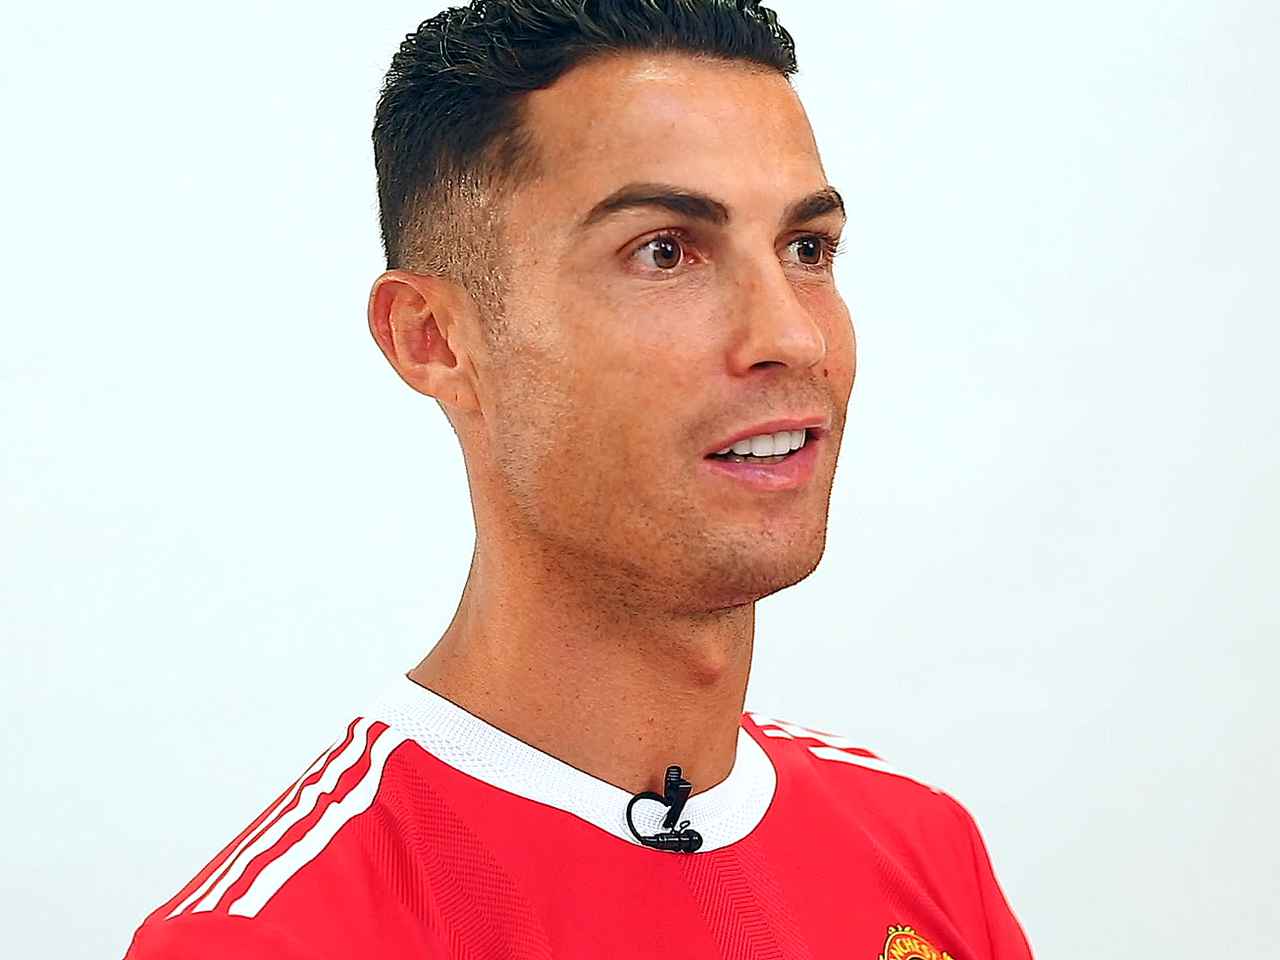 Exclusive first interview with Cristiano Ronaldo after transfer to Man Utd  | Manchester United